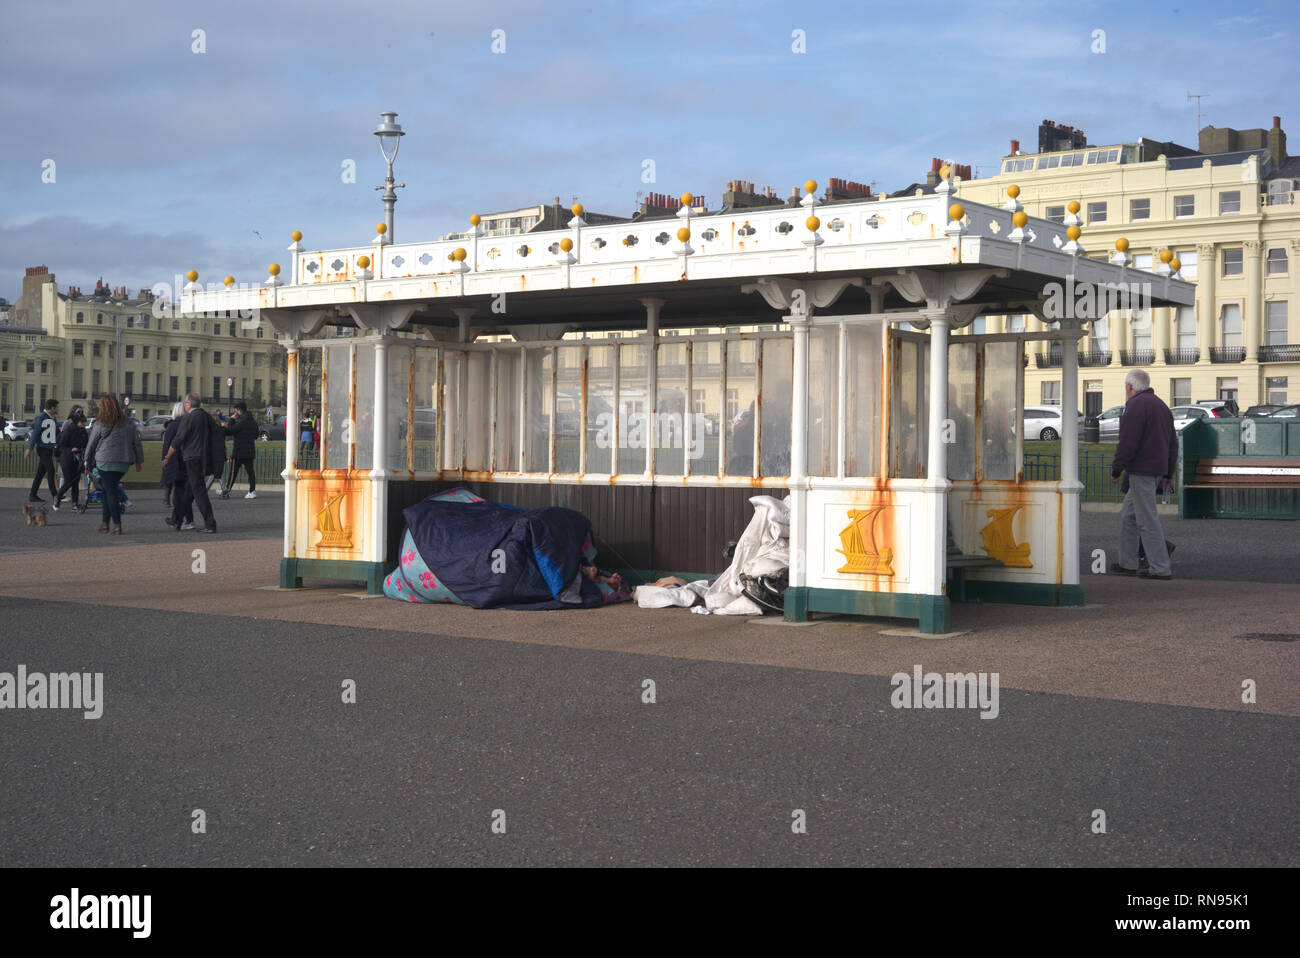 Brighton and Hove, England on February 17, 2019. Homeless's tent on the promenade. Stock Photo